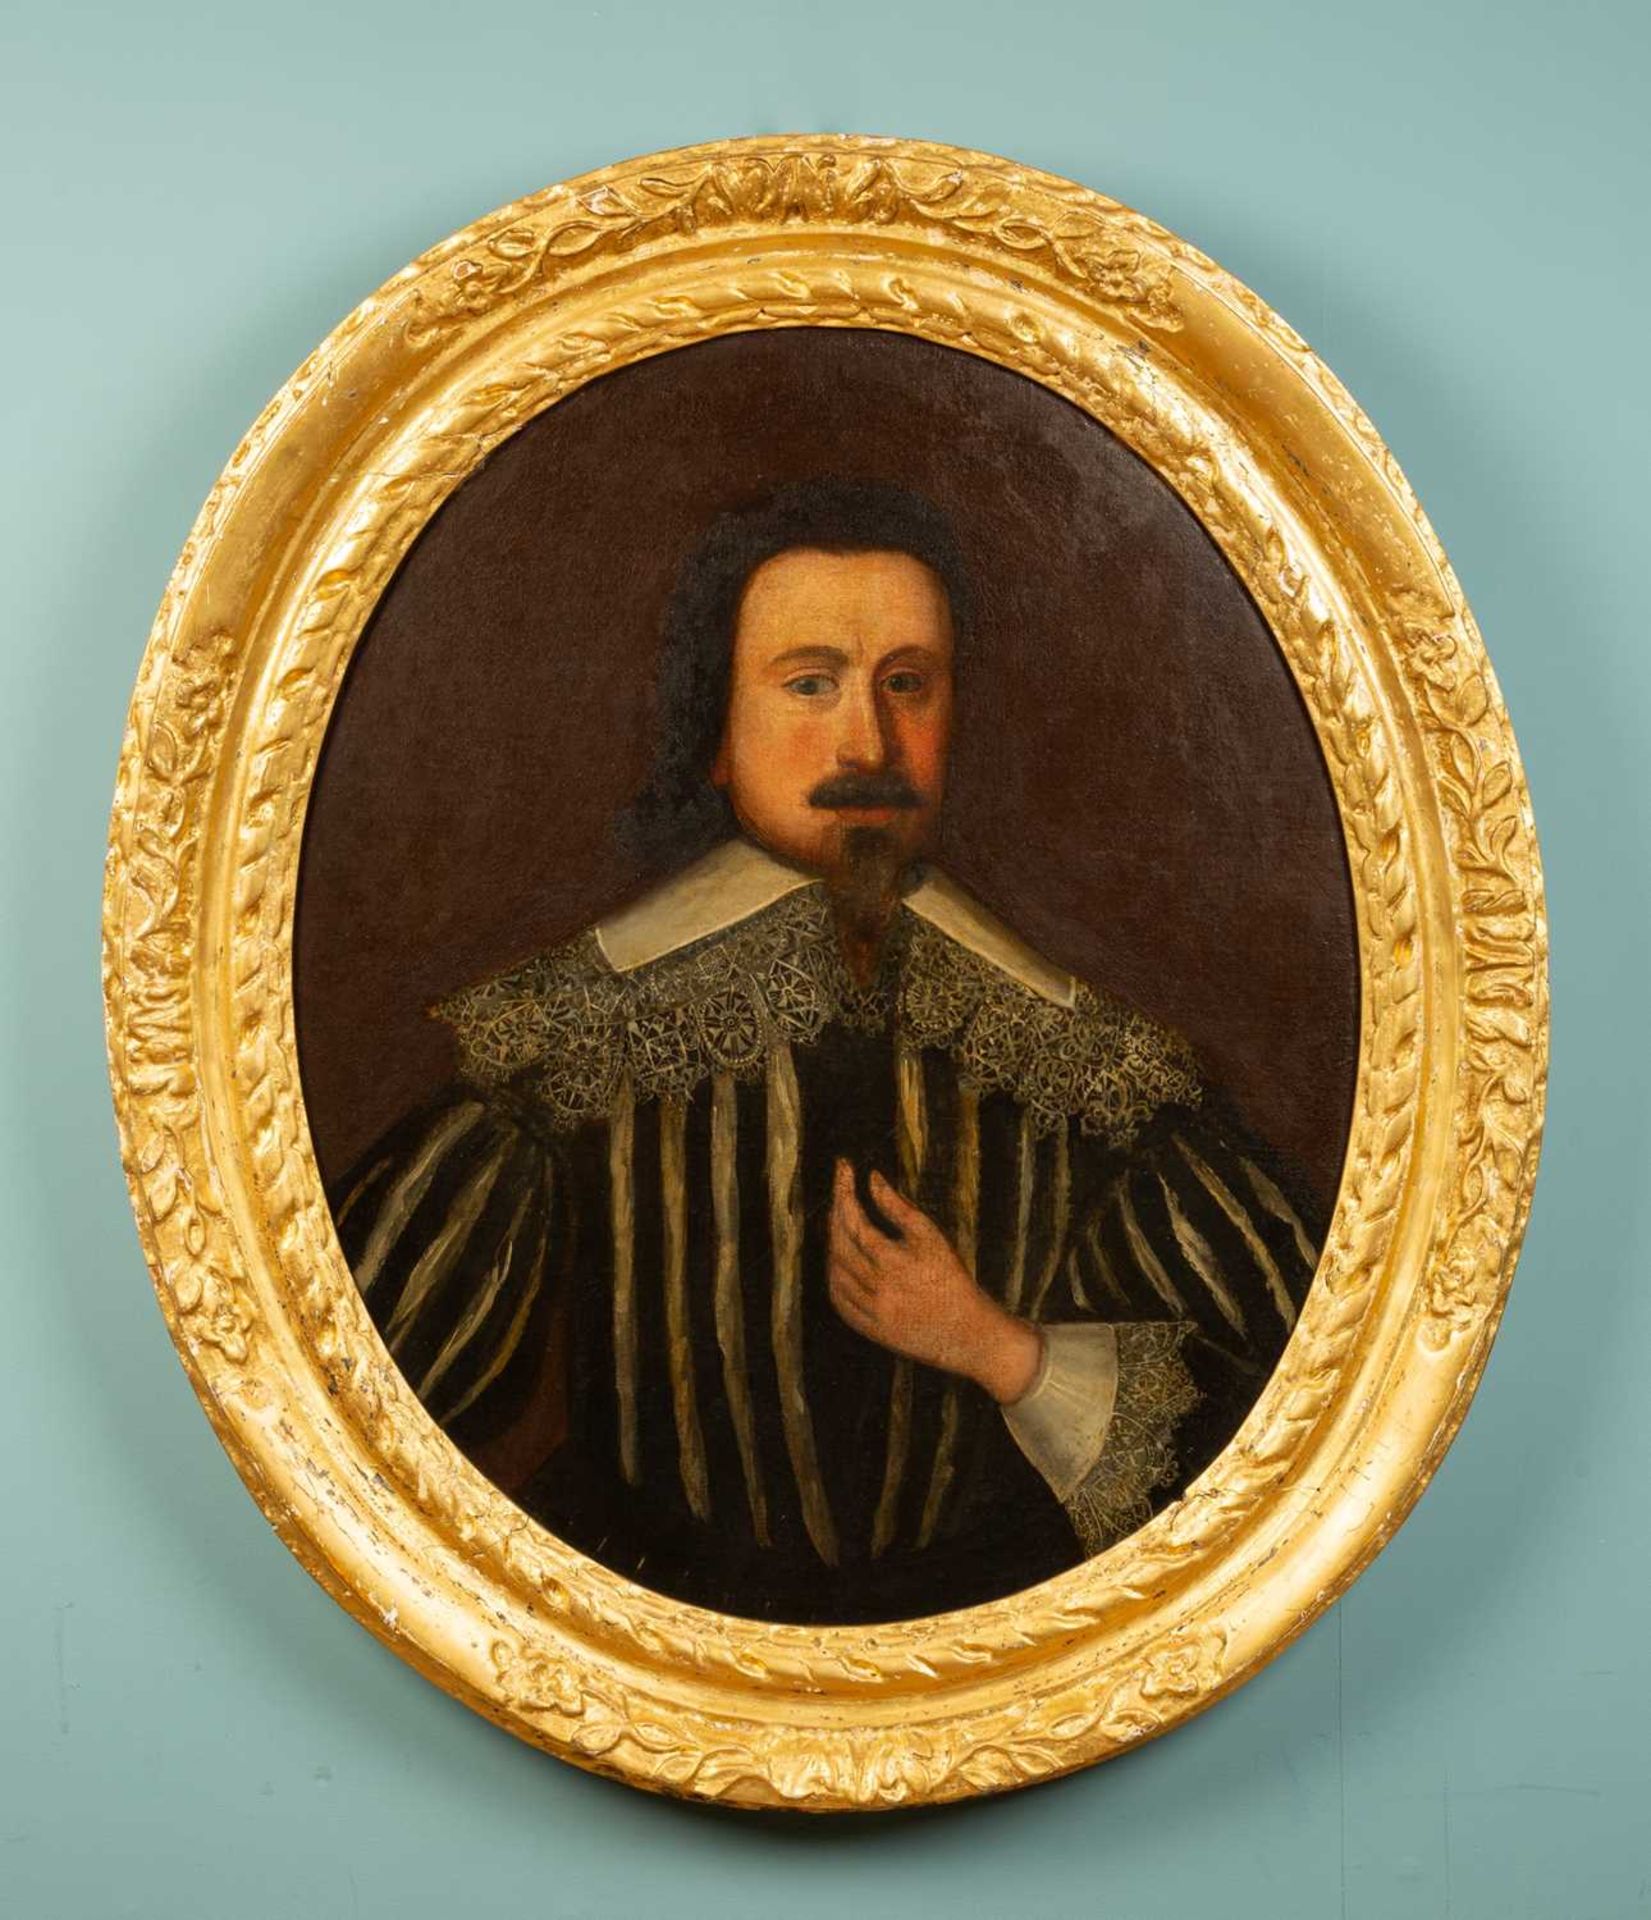 A portrait of a 17th century Spanish nobleman